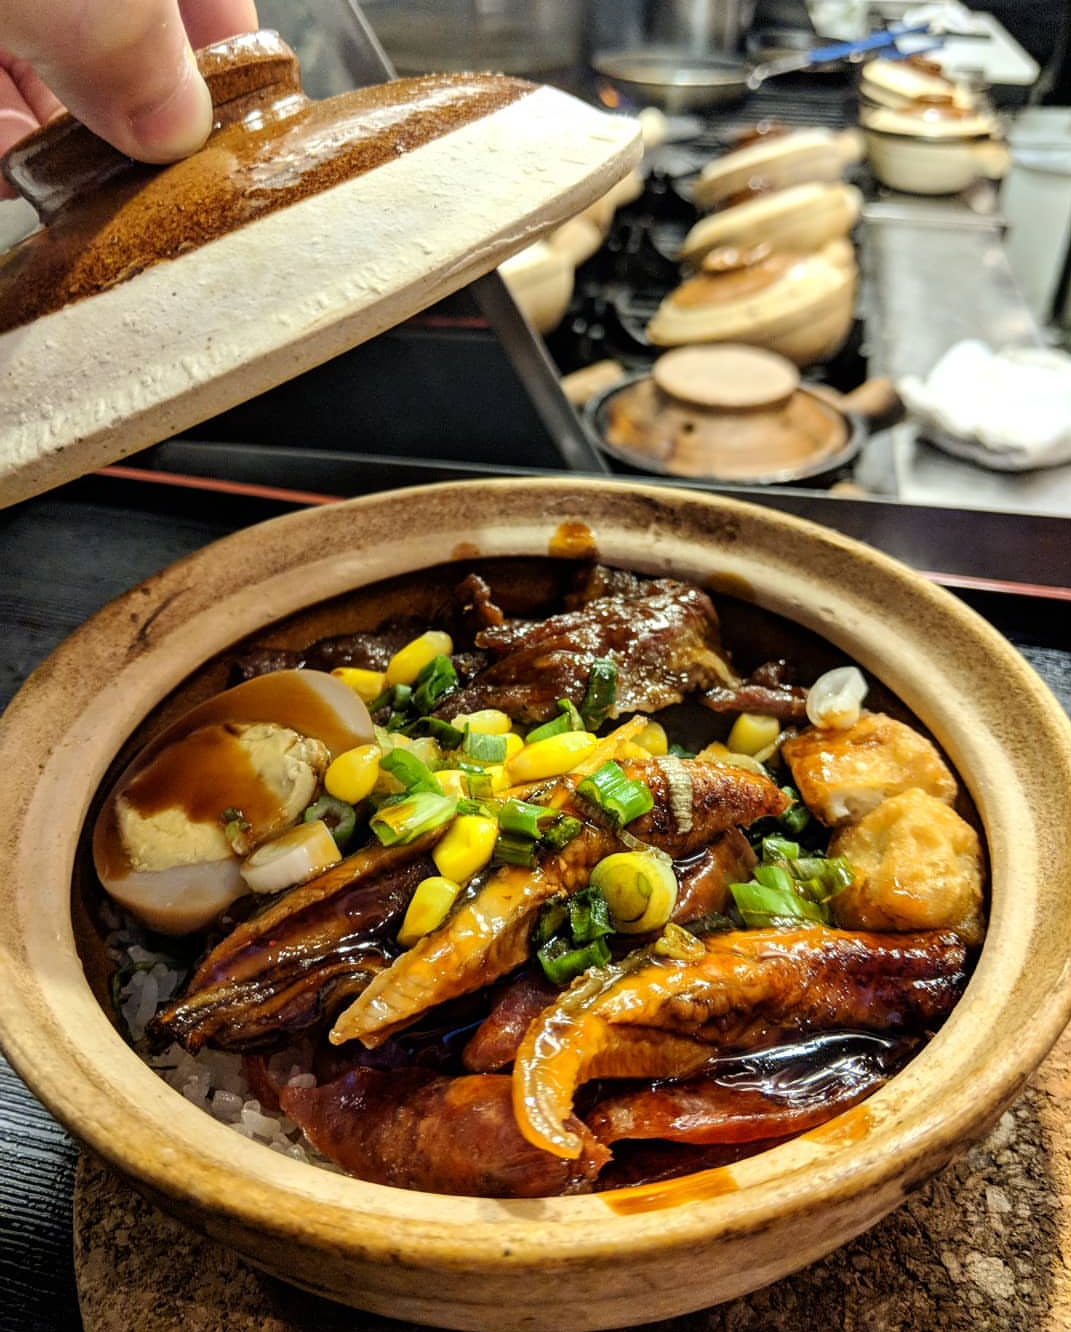 Clay Pot serves a clay pot with unagi (eel) and beef in the East Village.